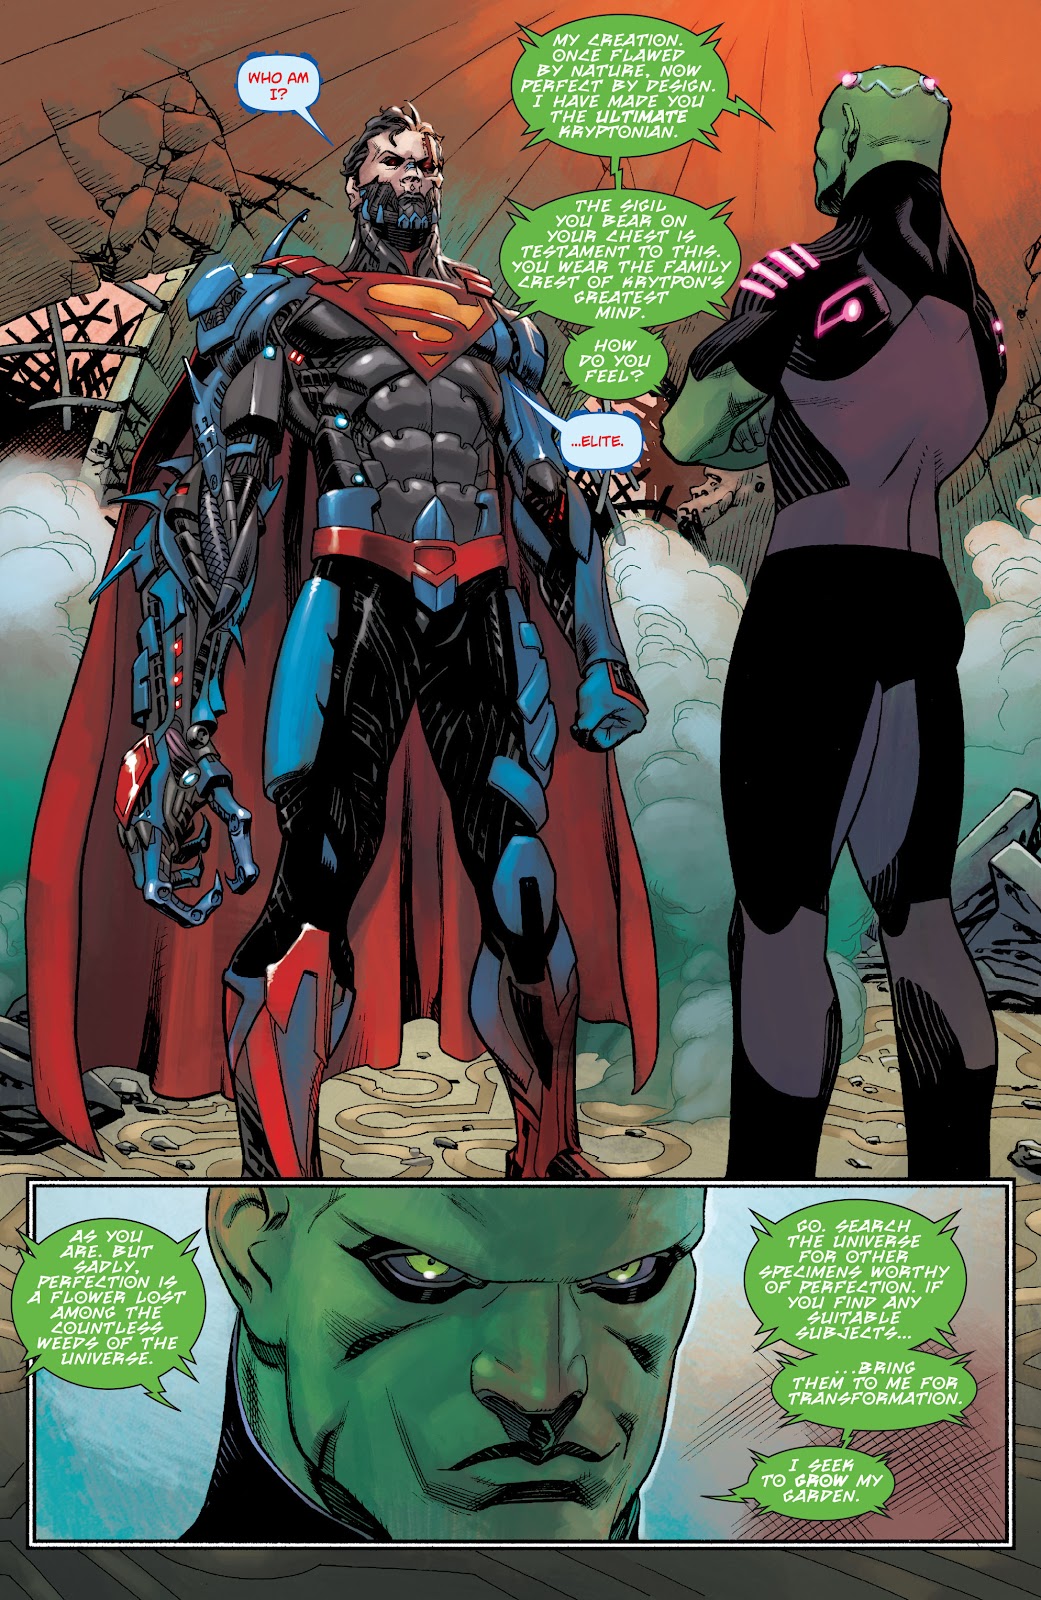 Action Comics (2011) issue 23.1 - Page 5